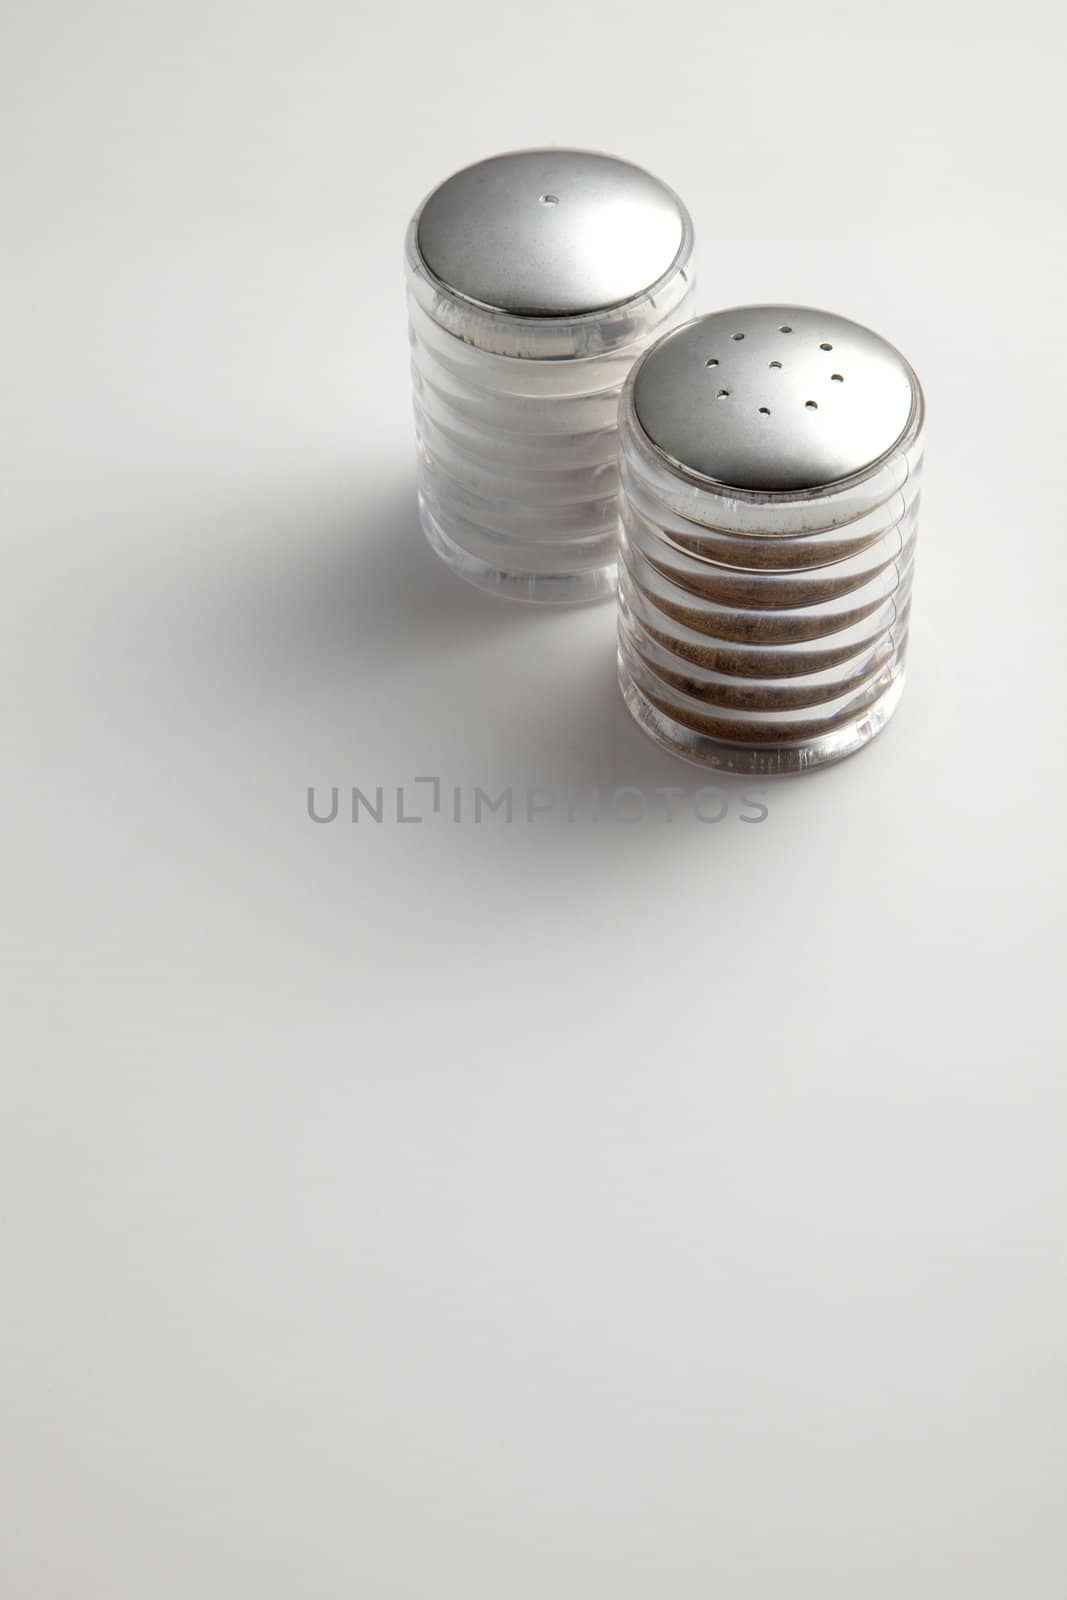 Salt and Pepper Shakers on the plain background